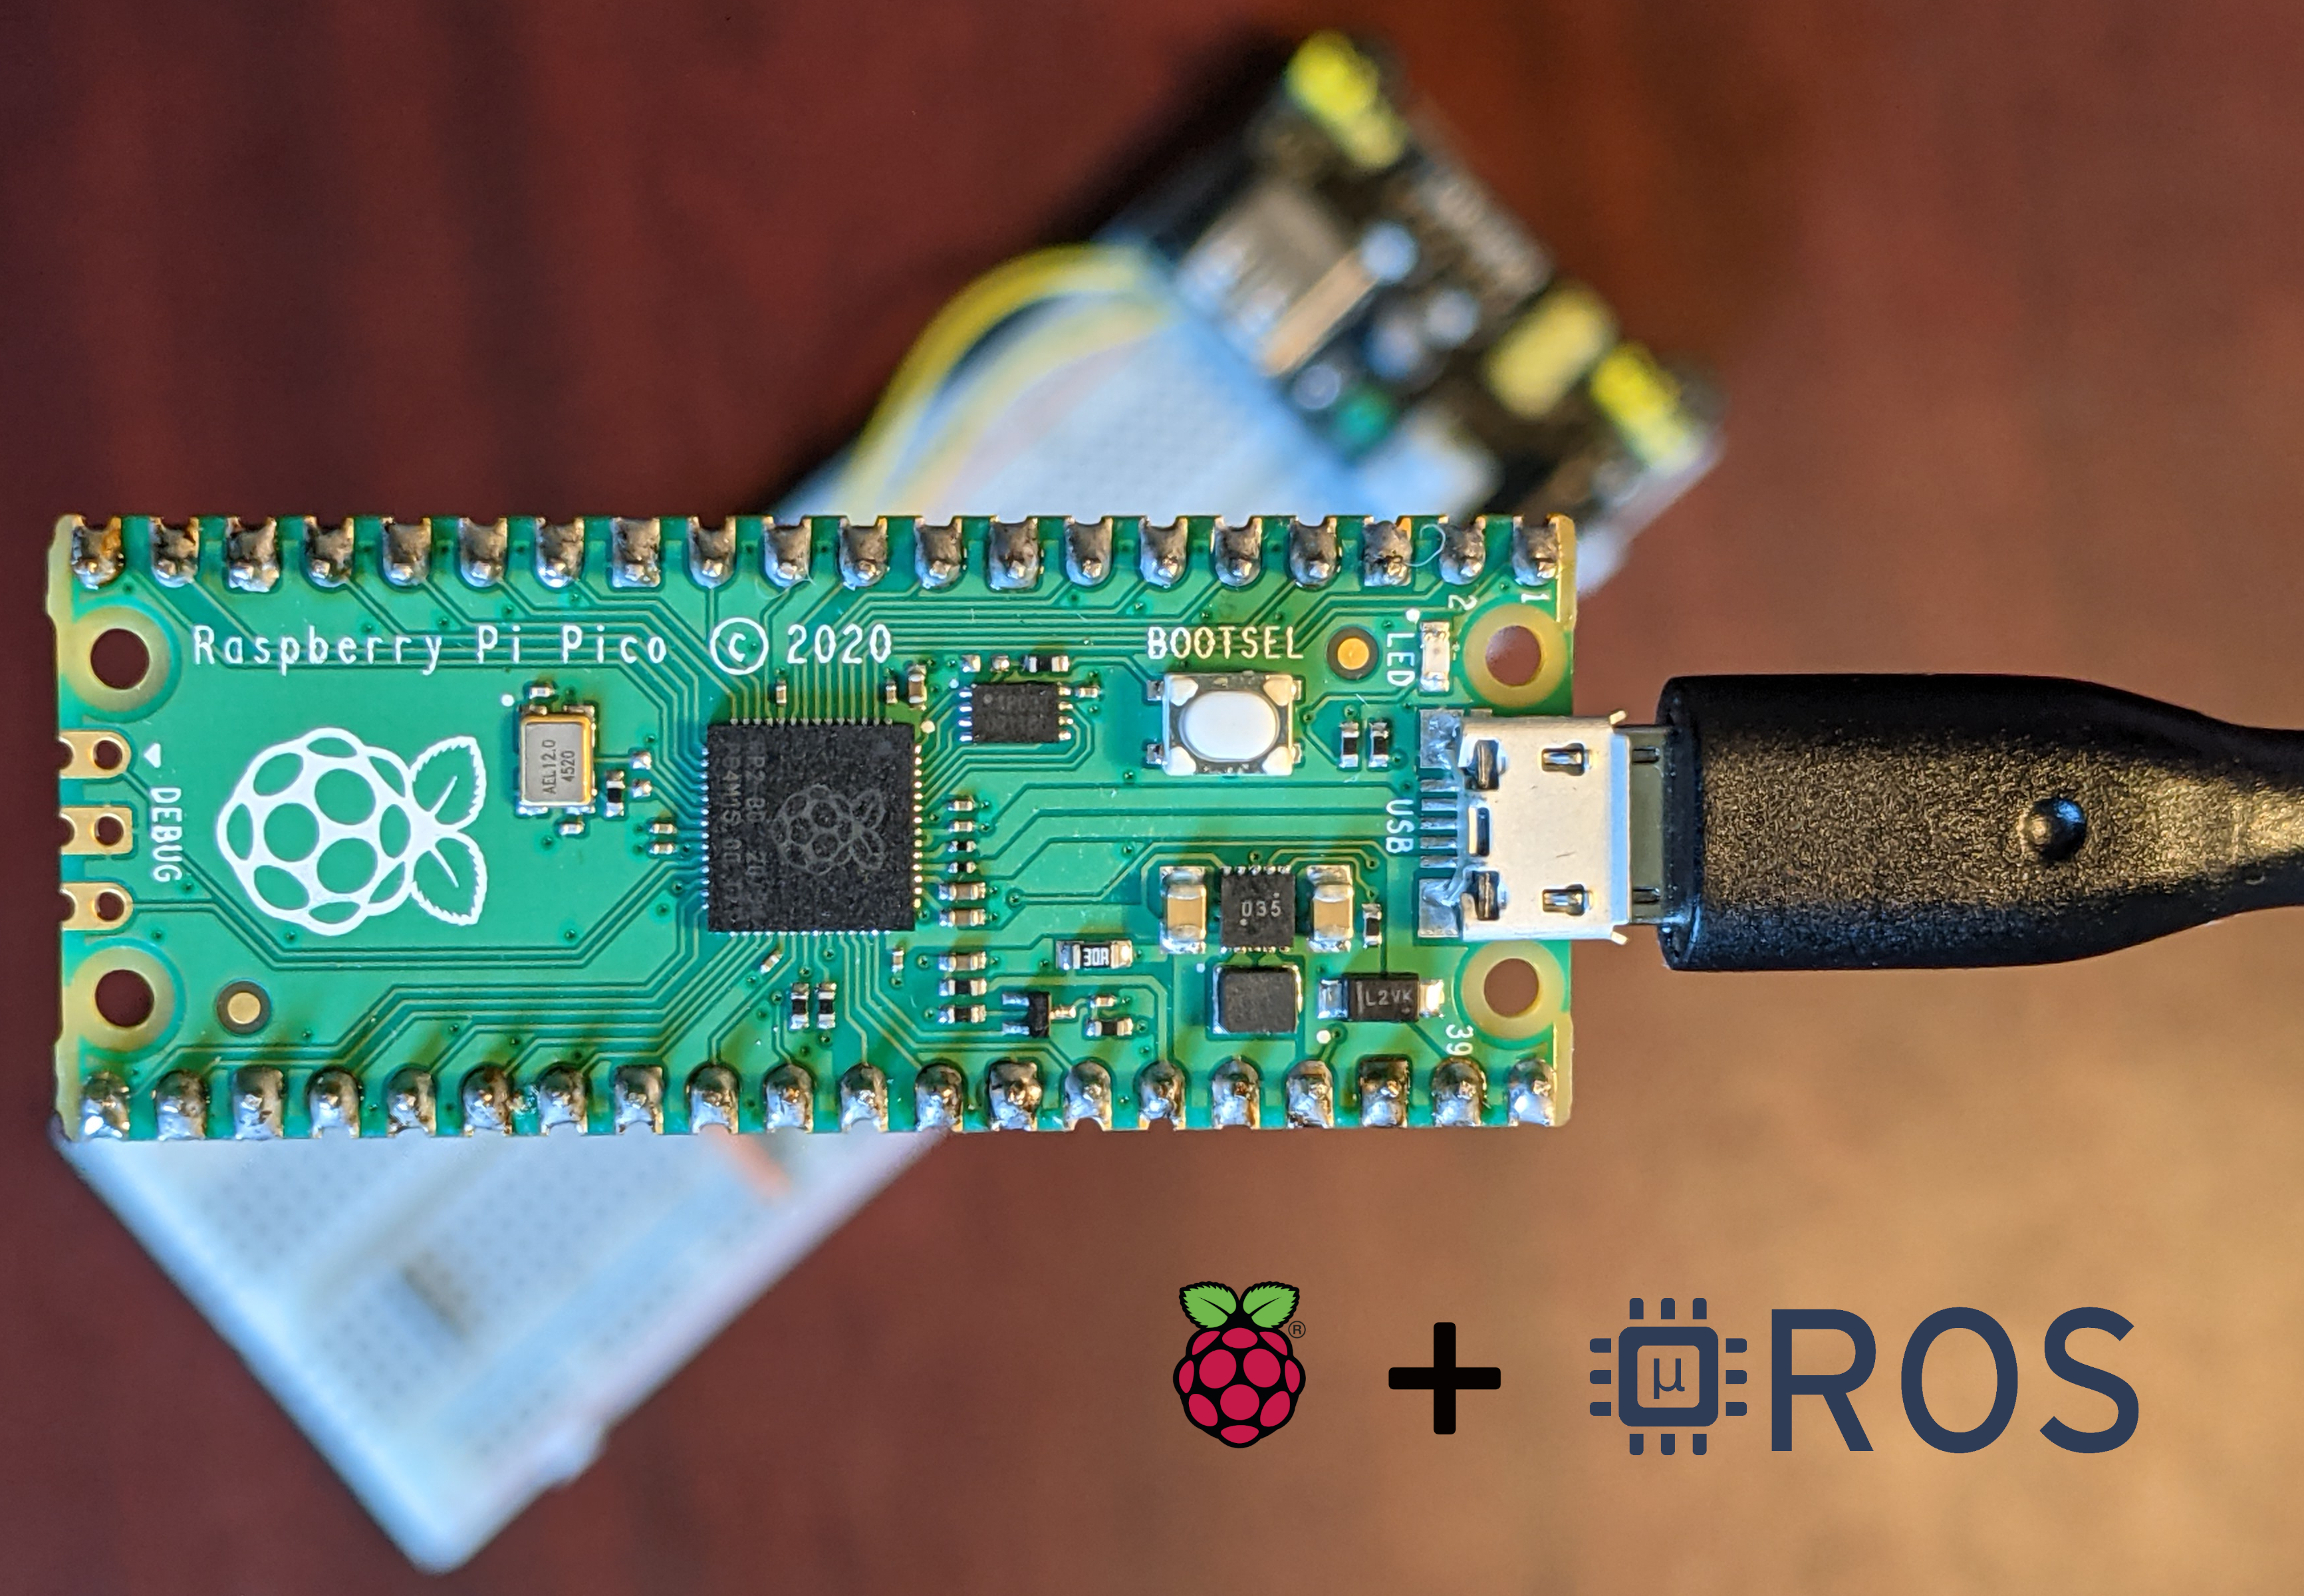 Getting started with micro-ROS on the Raspberry Pi Pico